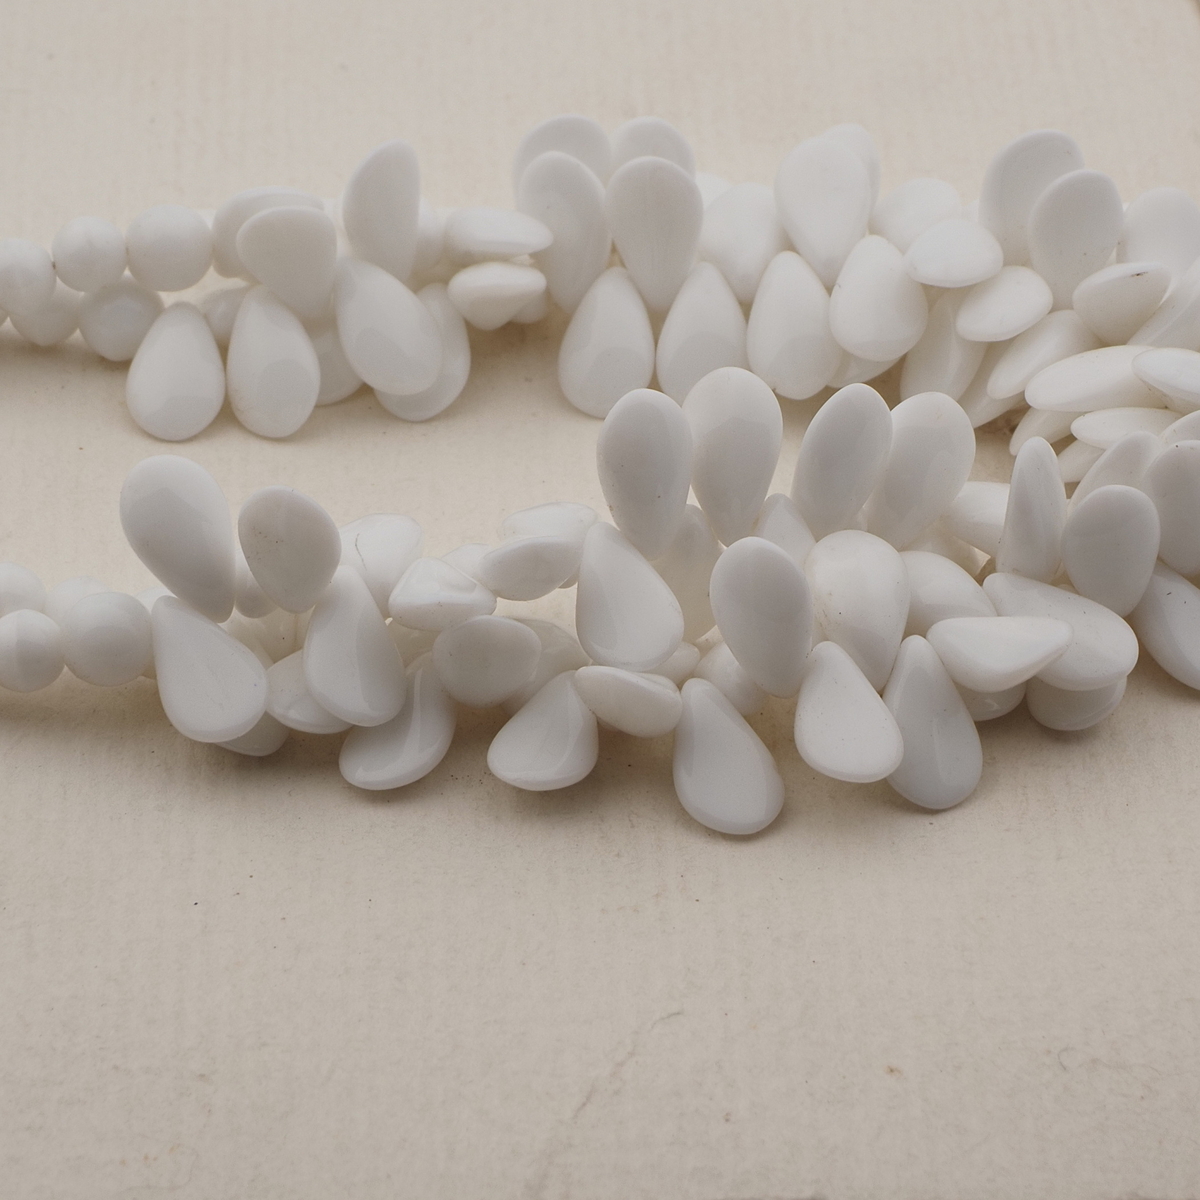 Vintage Czech 2 strand necklace white round leaf cluster pendant glass beads